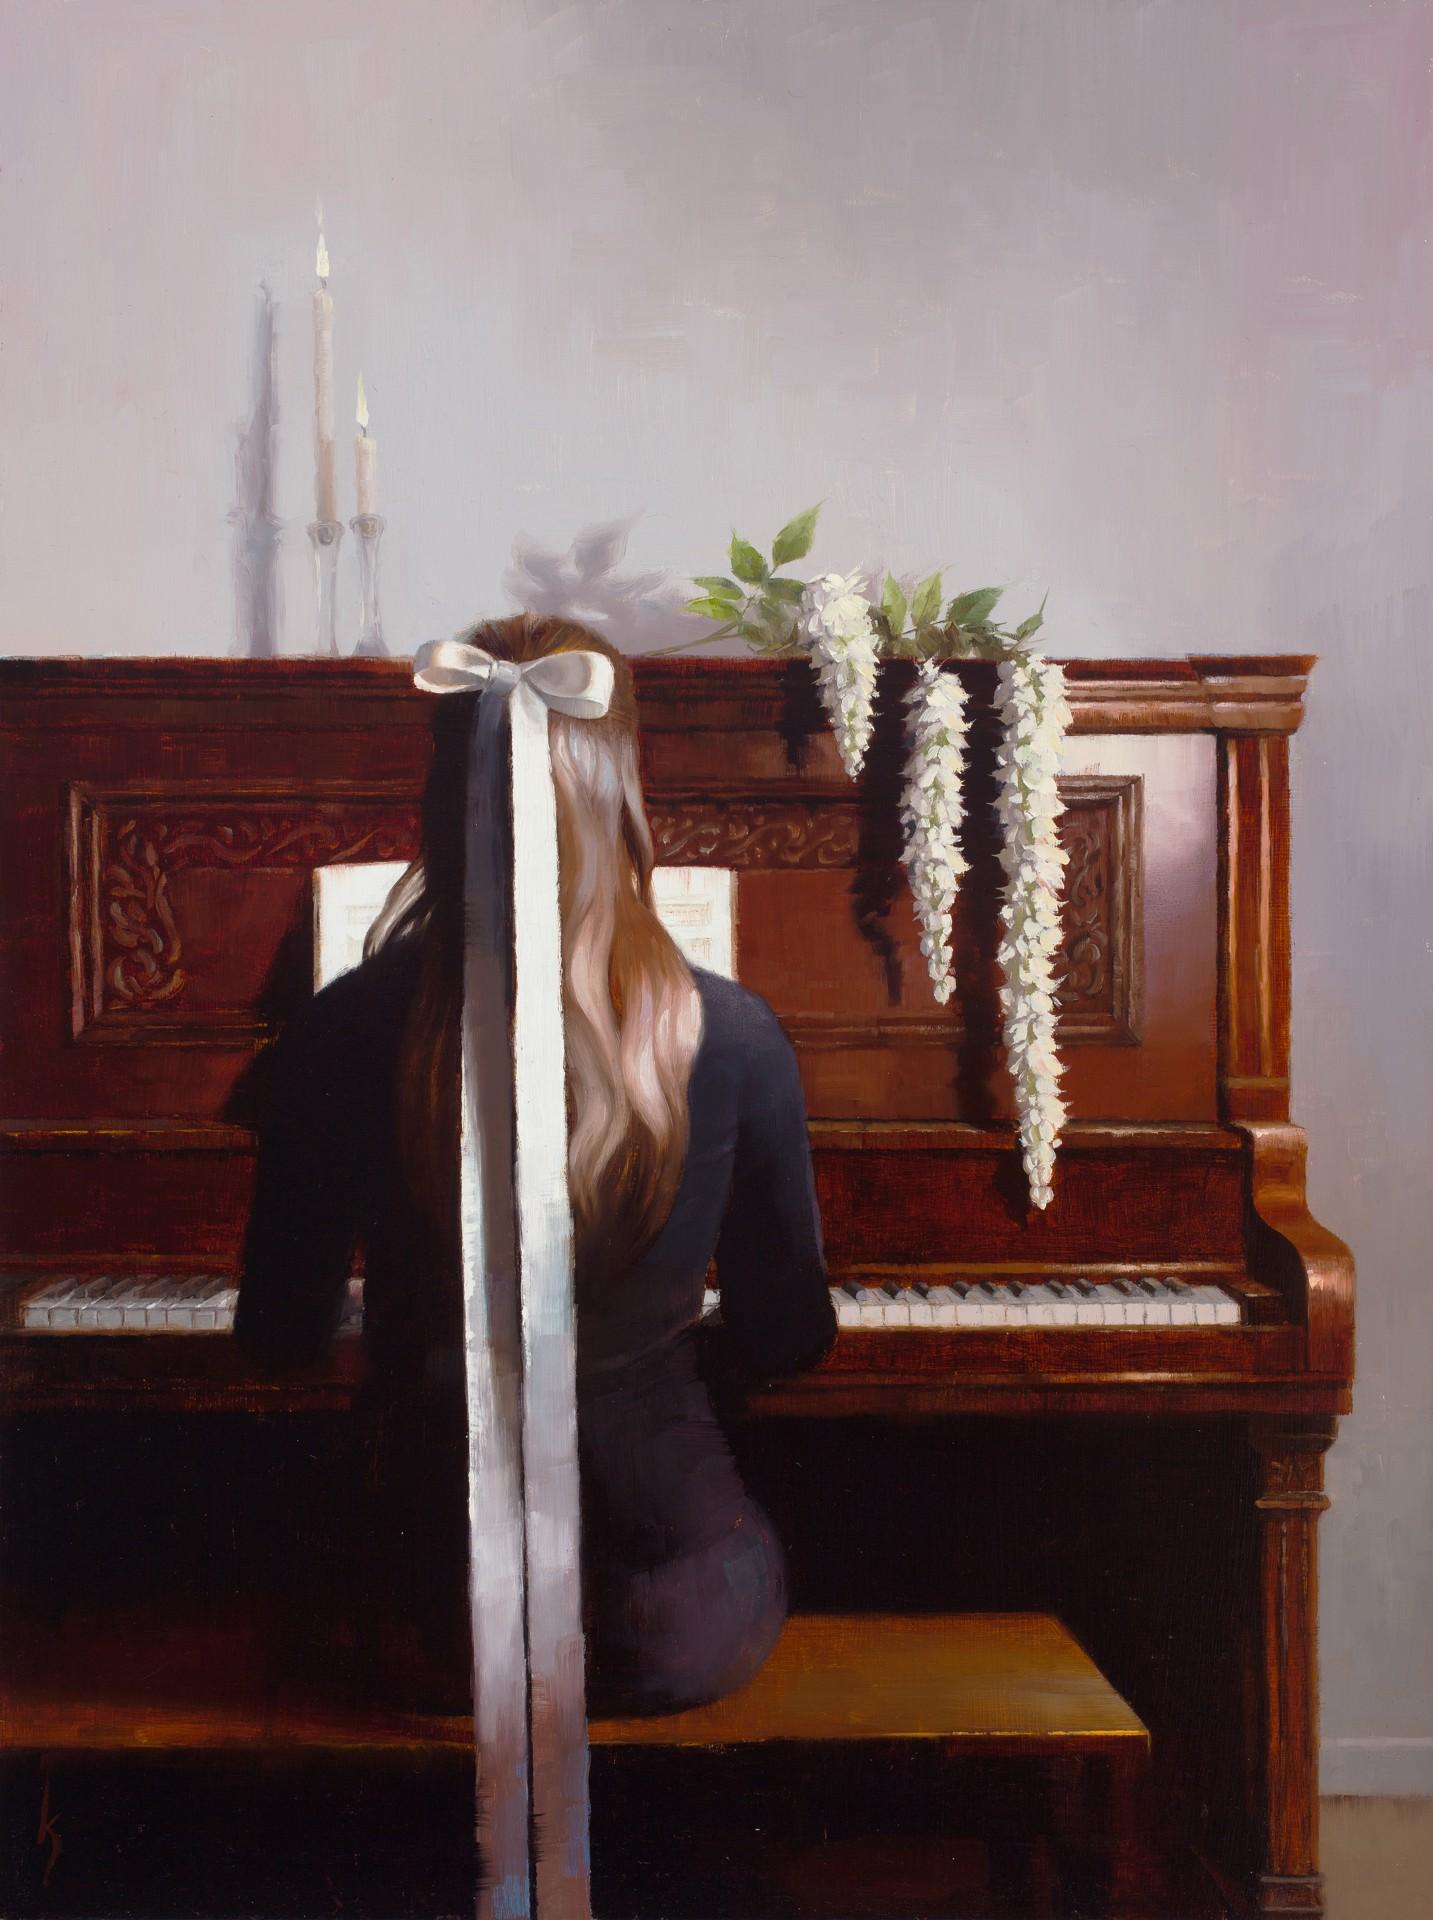 Kirsten Savage’s “Practice Makes Perfect” (2023) is an evocative oil on panel painting that captures a serene moment of a woman practicing piano. The artwork measures 16 x 12 inches, framed elegantly to 22.50 x 18.50 inches. This composition